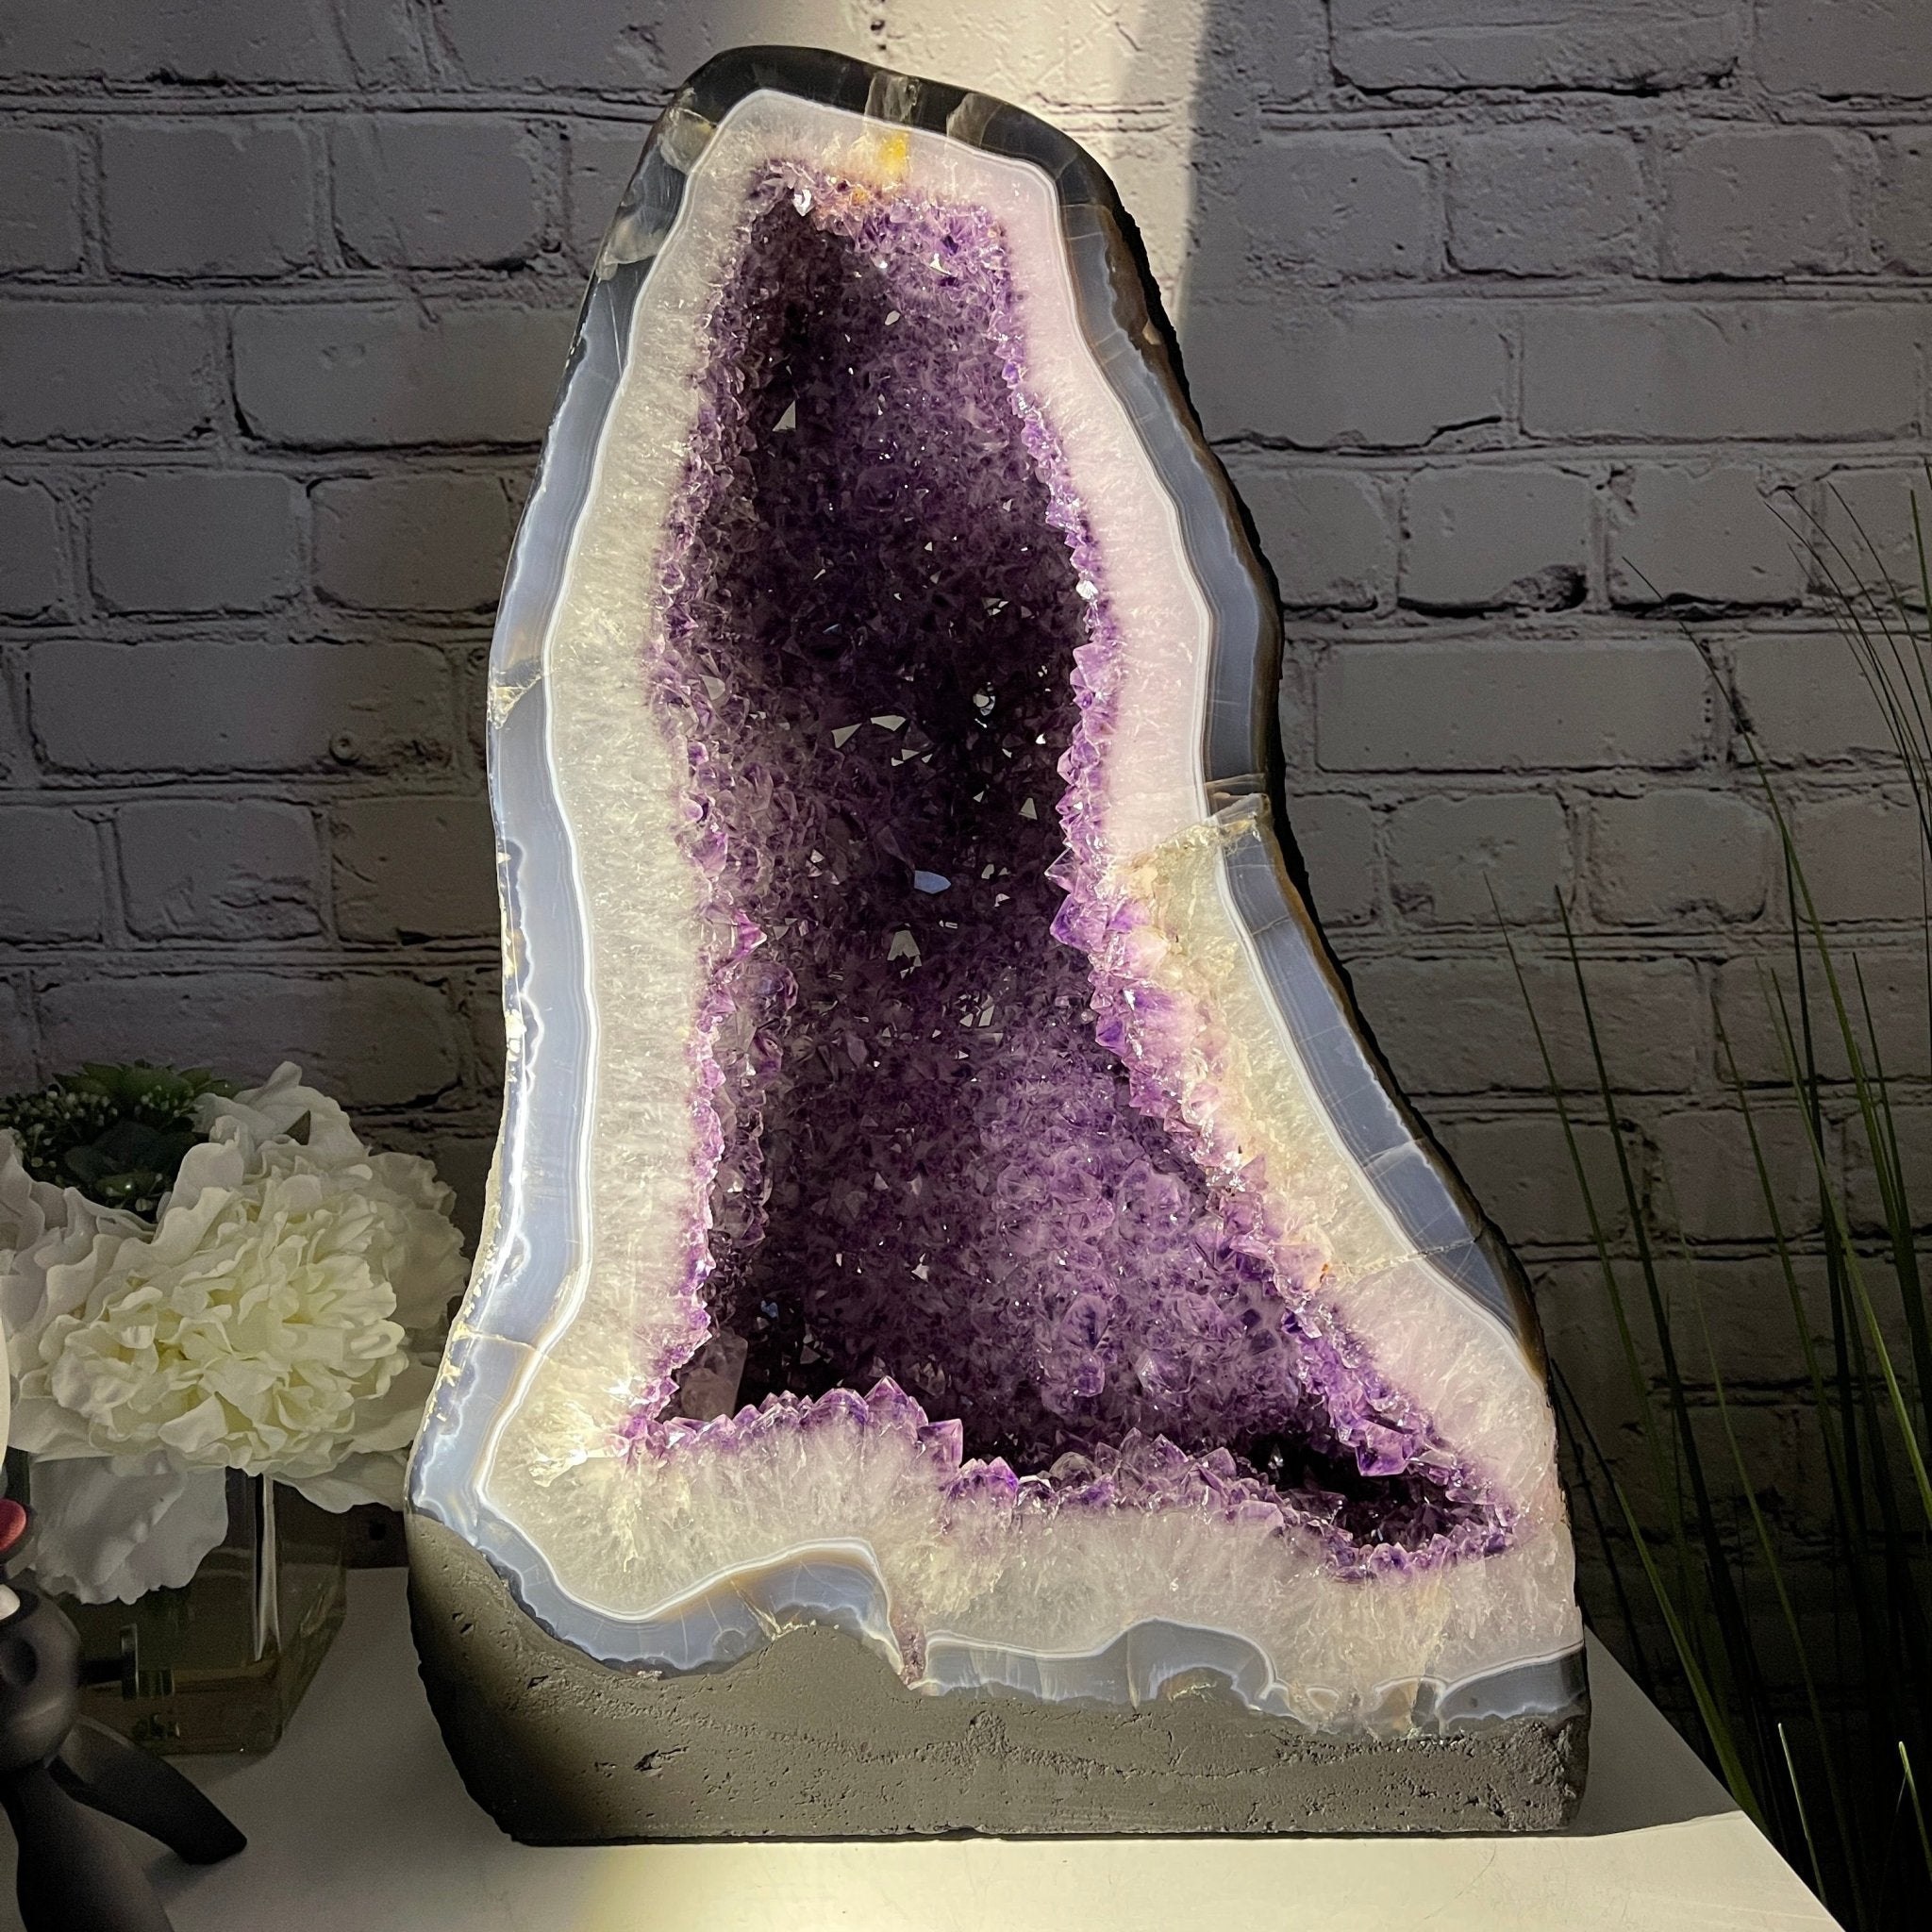 Extra Quality Brazilian Amethyst Cathedral, 19” tall & 63.8 lbs #5601-0443 by Brazil Gems - Brazil GemsBrazil GemsExtra Quality Brazilian Amethyst Cathedral, 19” tall & 63.8 lbs #5601-0443 by Brazil GemsCathedrals5601-0443